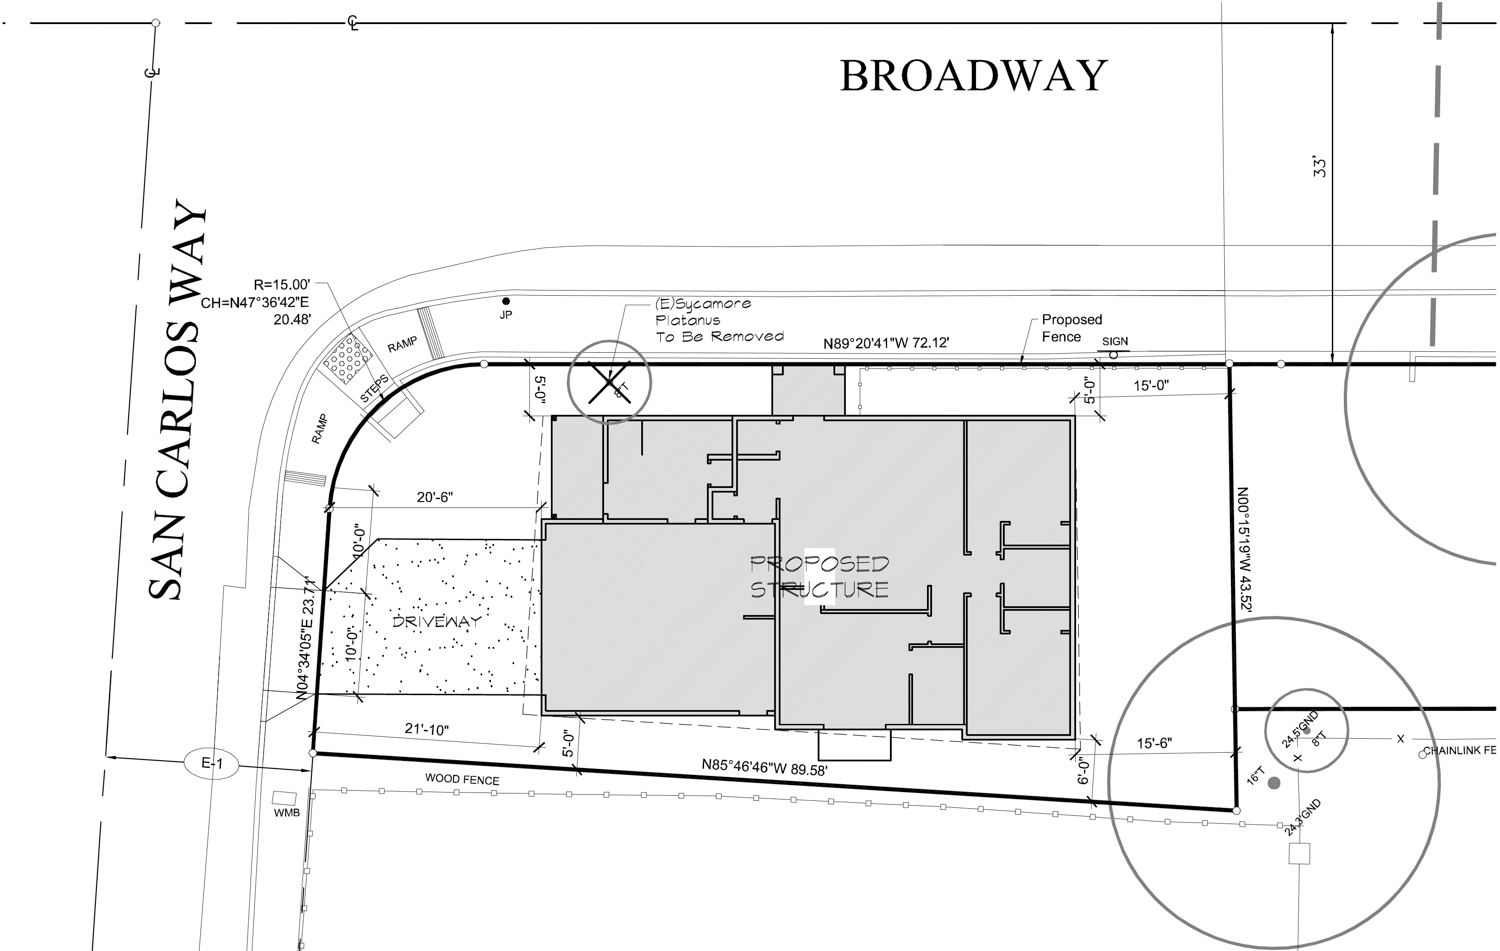 3950 Broadway site plan, design by Fineline Drafting